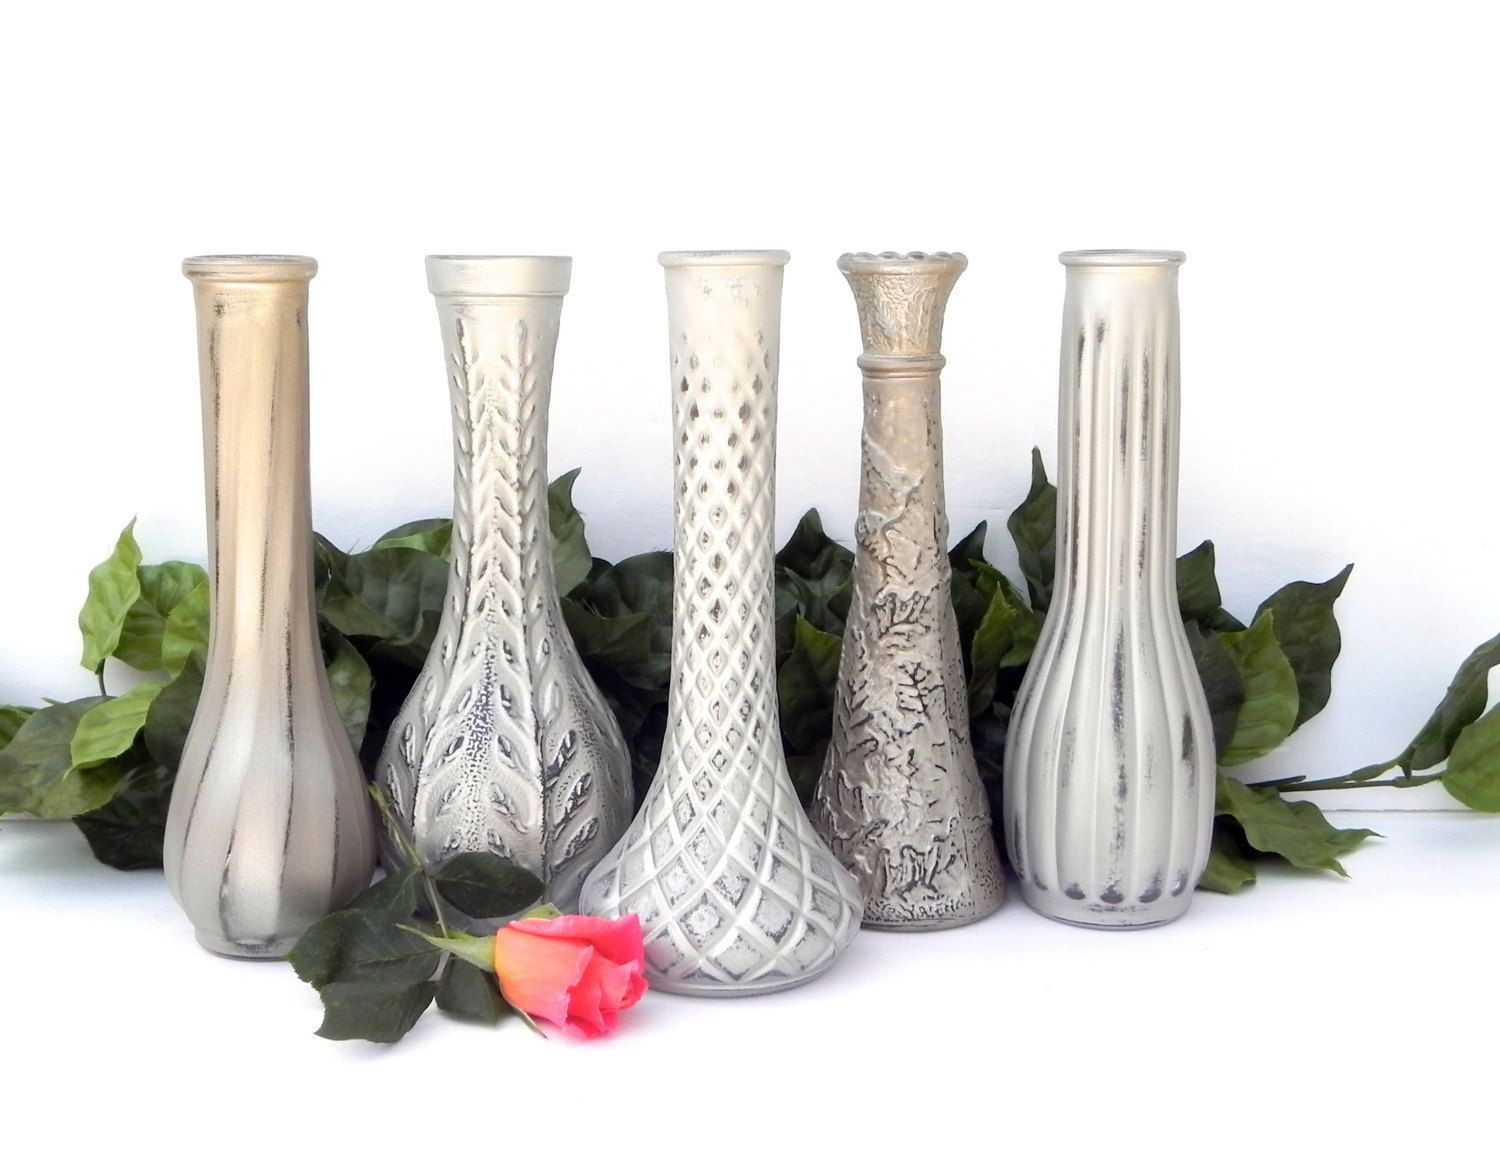 26 Spectacular Tiffany Vases Vintage 2024 free download tiffany vases vintage of silver bud vase photos metallic shabby chic bud vases nickel silver throughout metallic shabby chic bud vases nickel silver and by glasscastle2